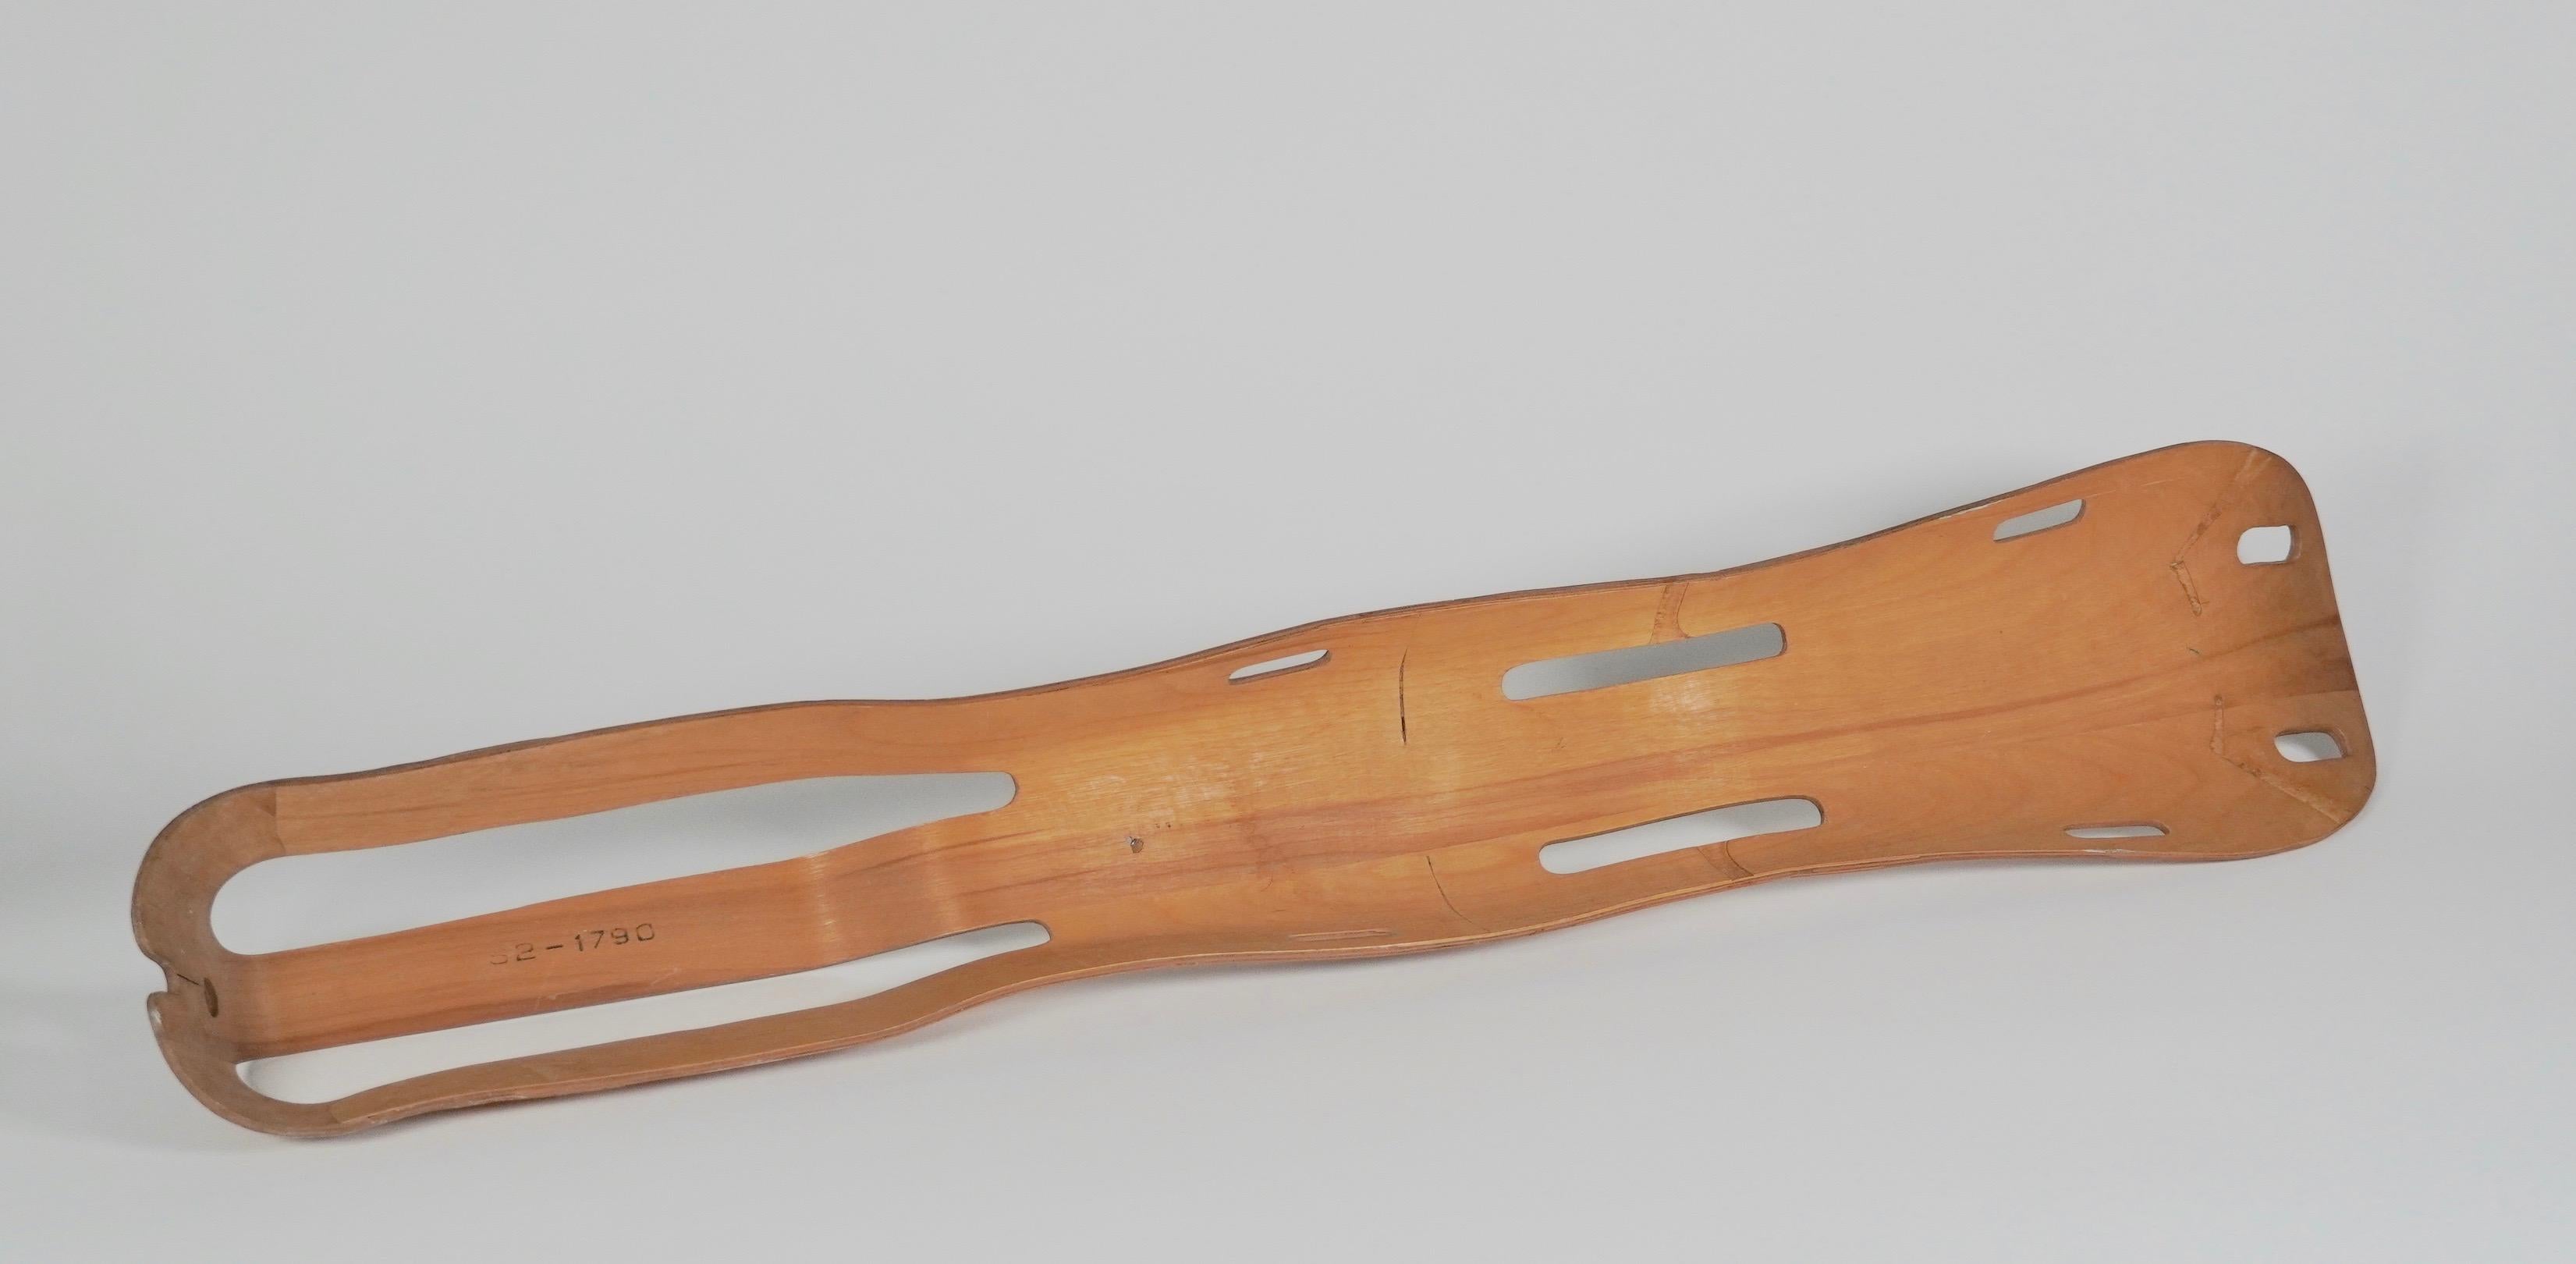 Created by Ray and Charles Eames between 1941 to 1942 for the U.S. Navy is the molded plywood leg splint, plywood was called Plyformed Wood during this time. It was the Eameses first mass produced design and it was a game changer during this period